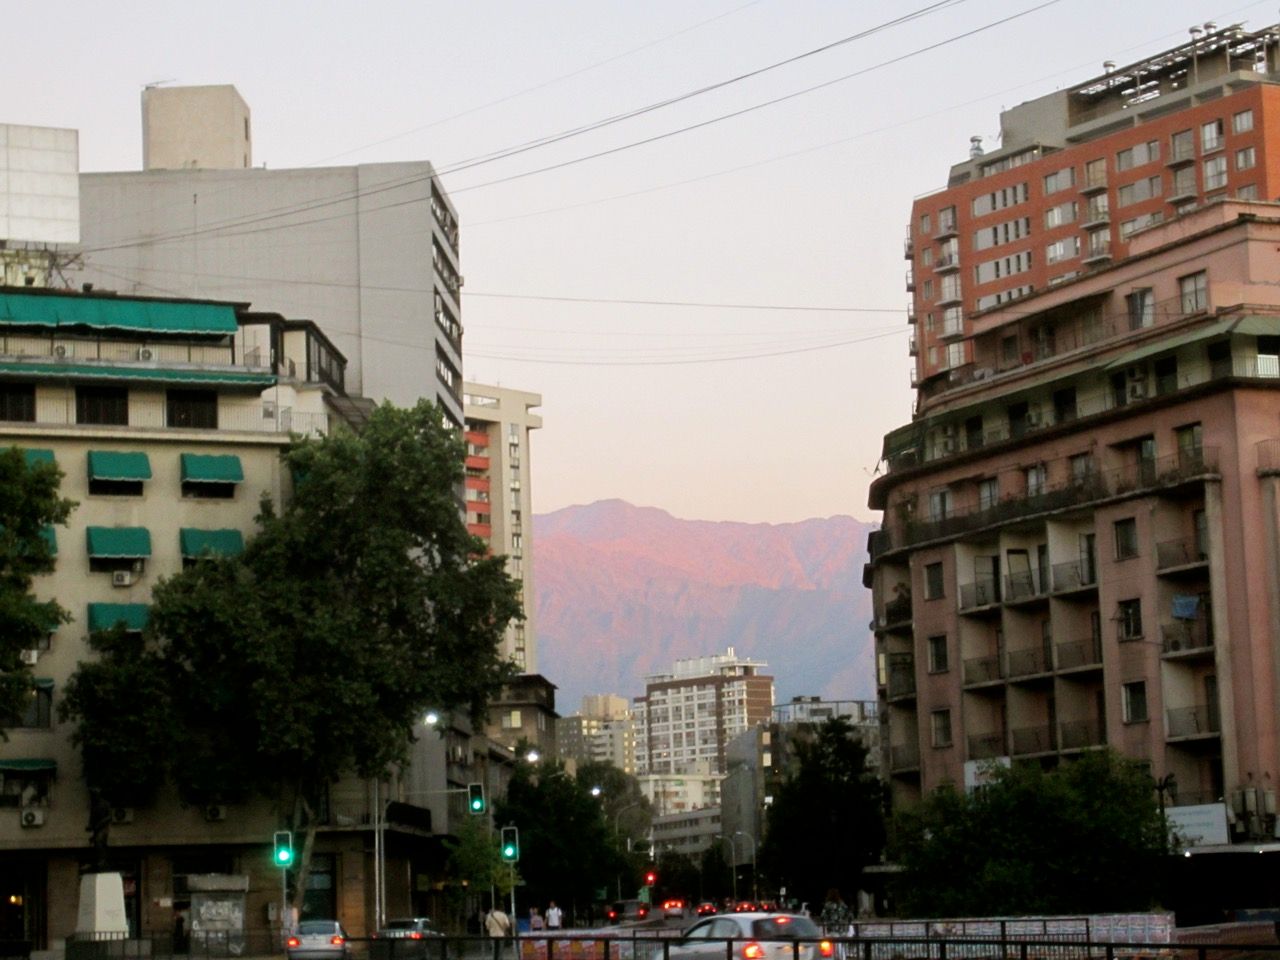 Mountains visible from downtown Santiago, bright red from the sunset.